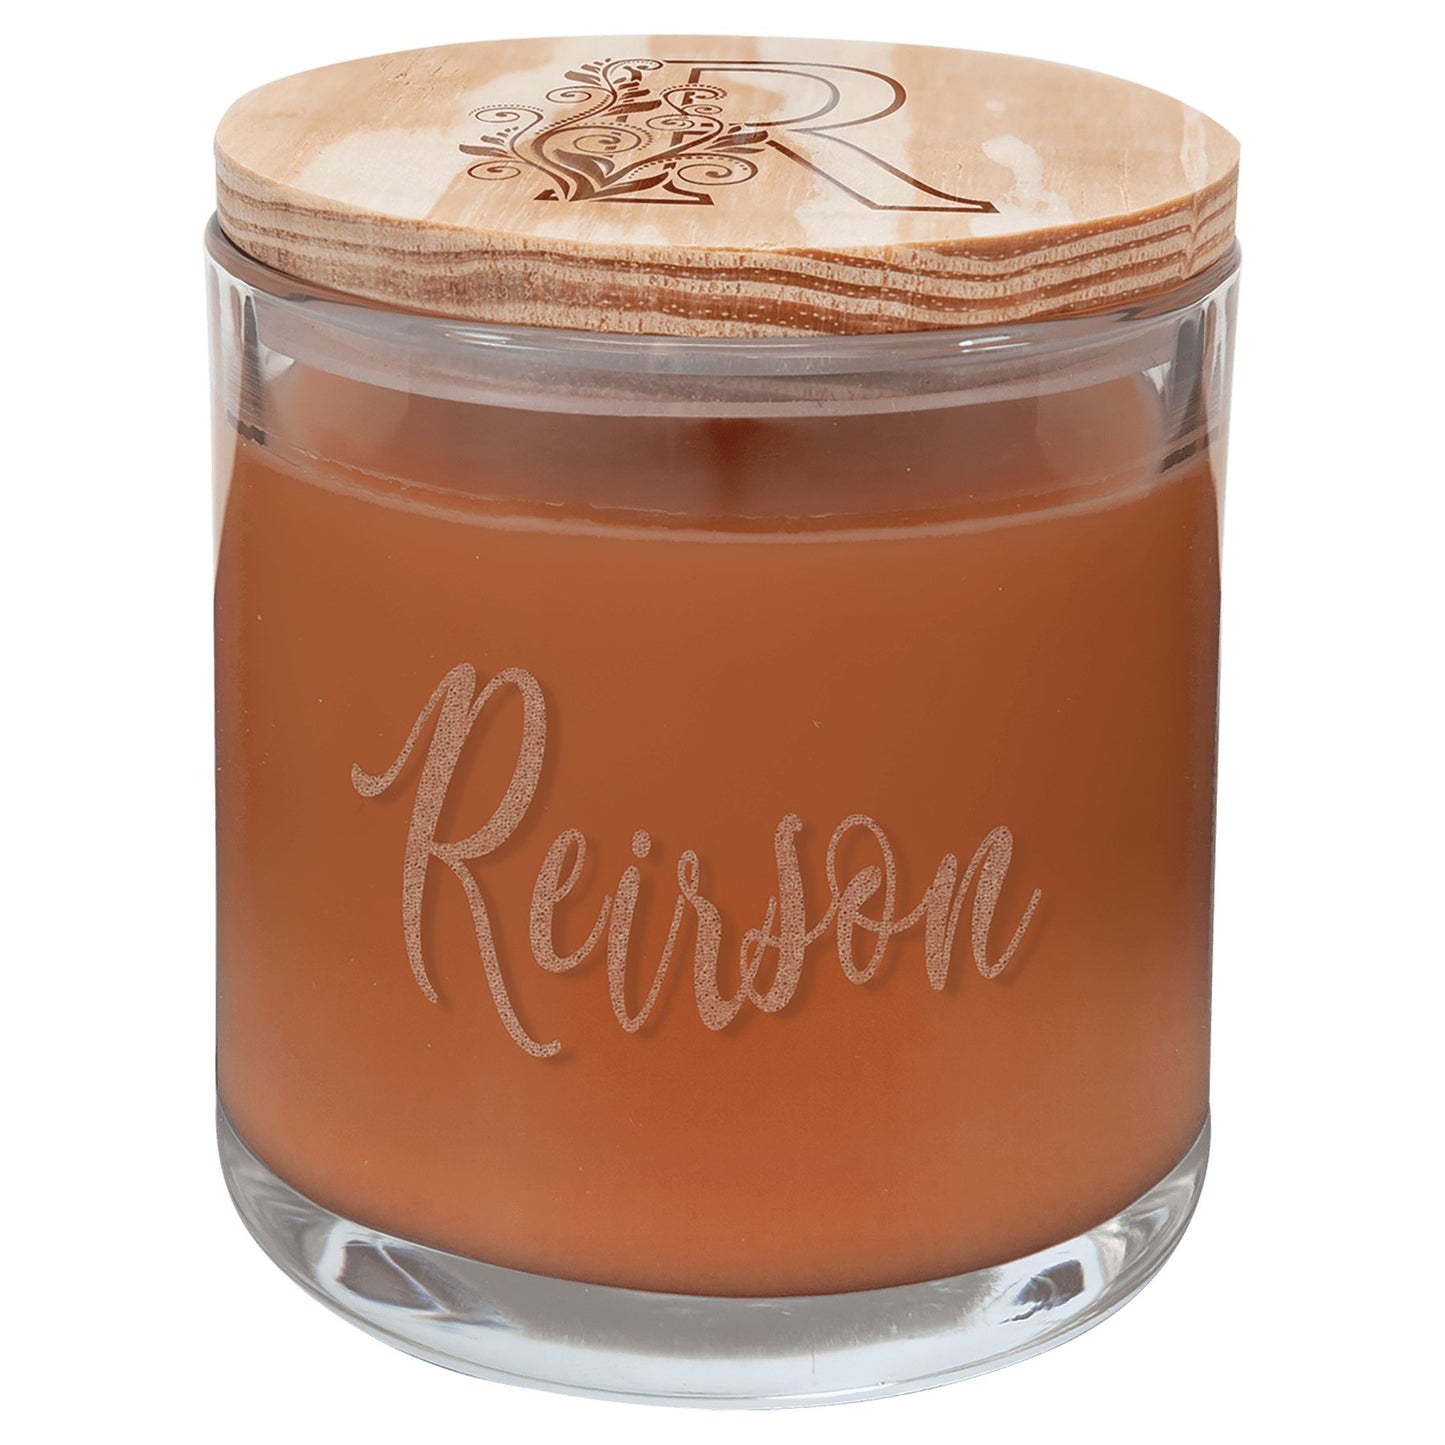 Customizable Scented Candle in a Glass Holder with Wood Lid - Legacy Creator IncPumpkin Spice